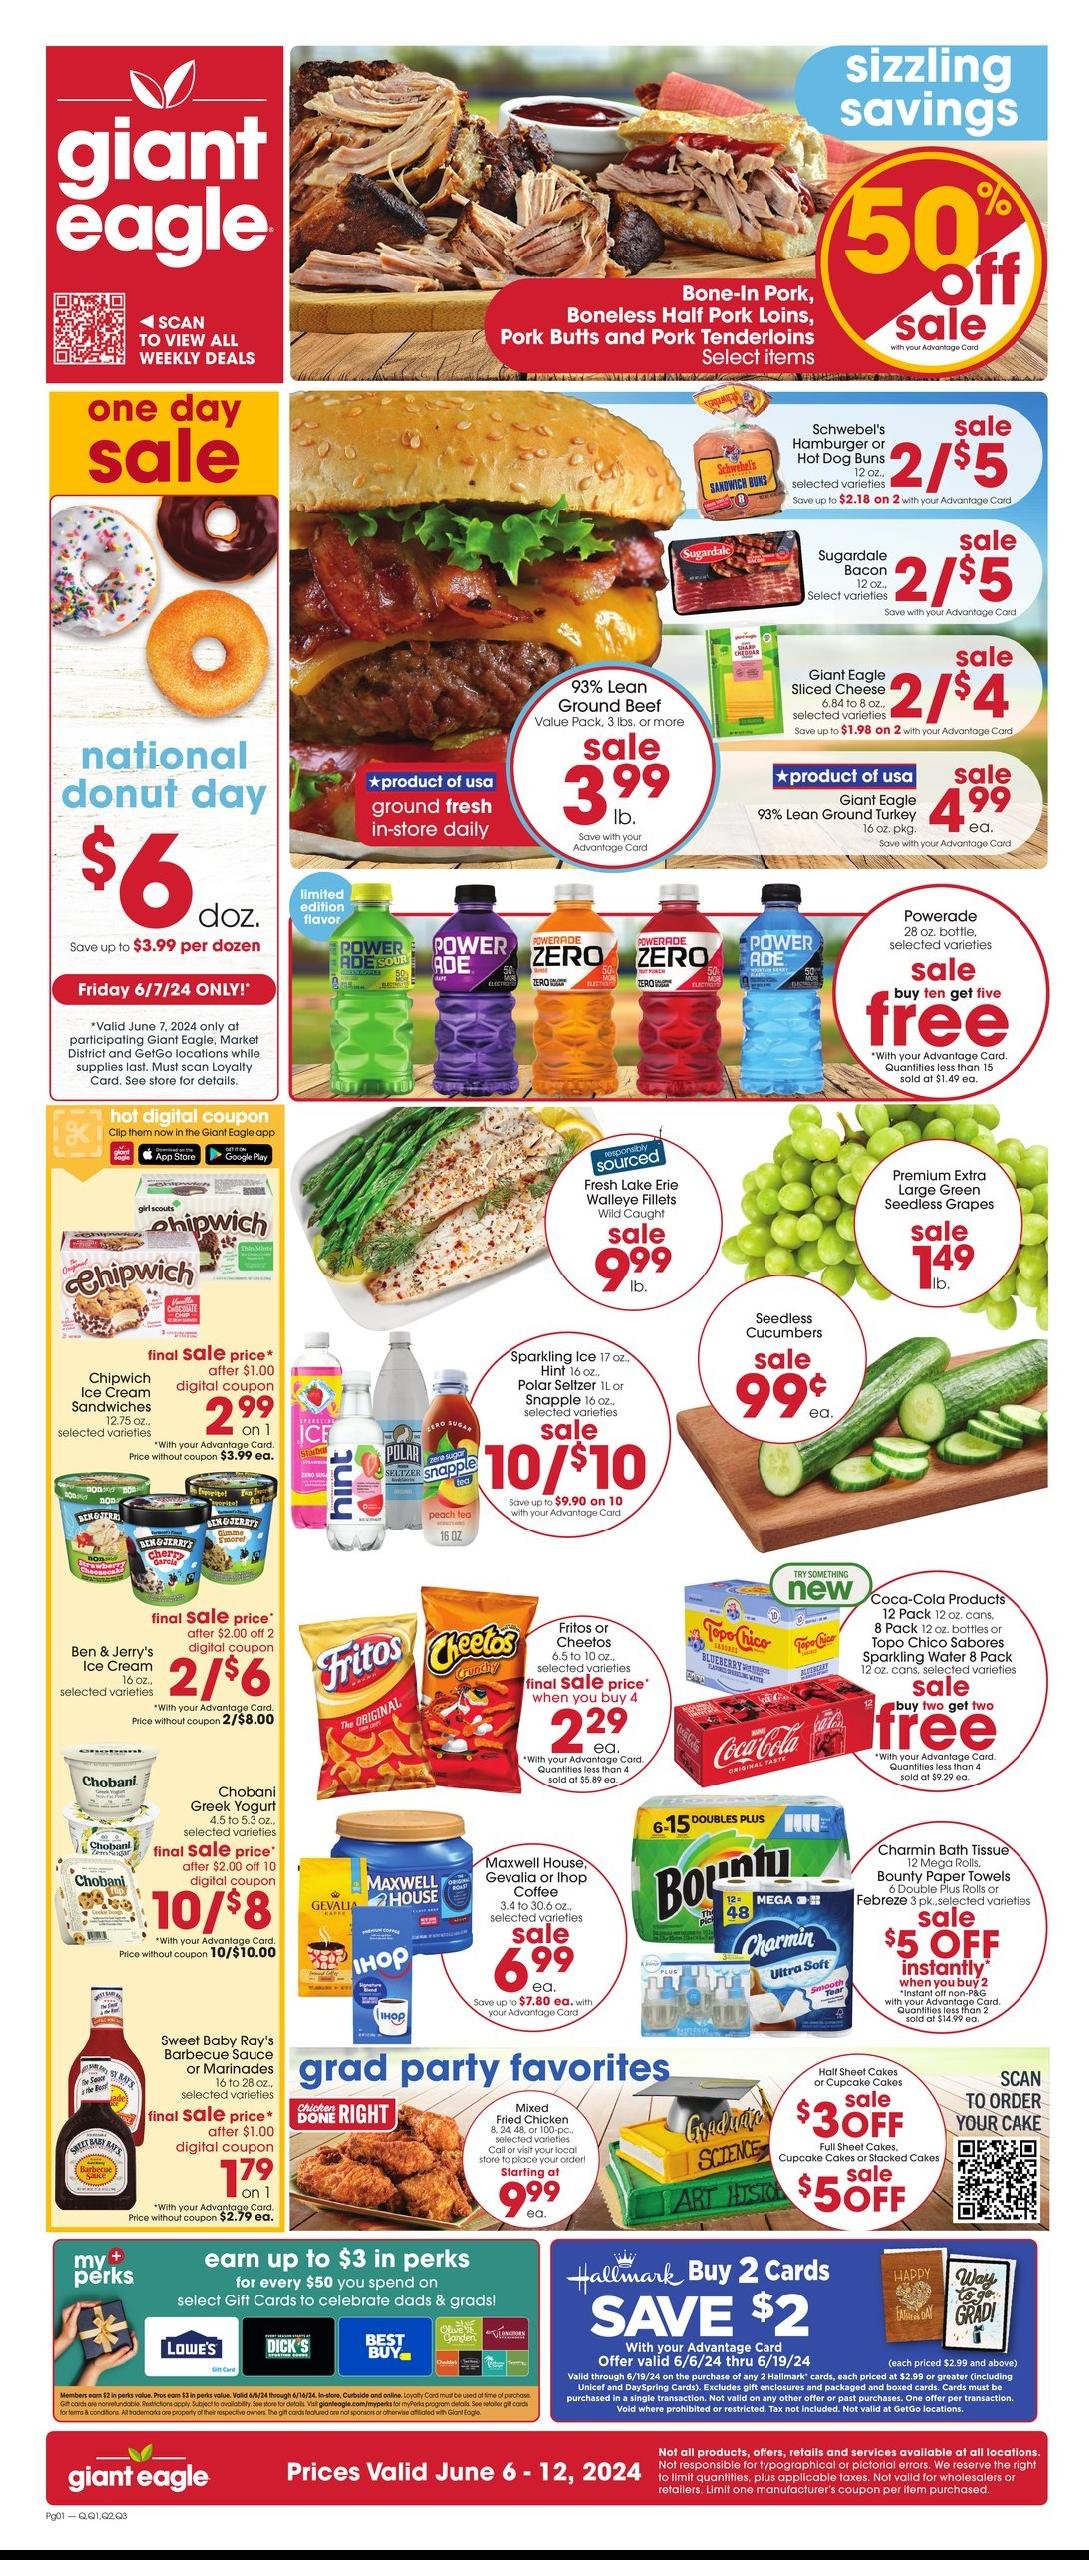 Giant Eagle weekly ad - page 1